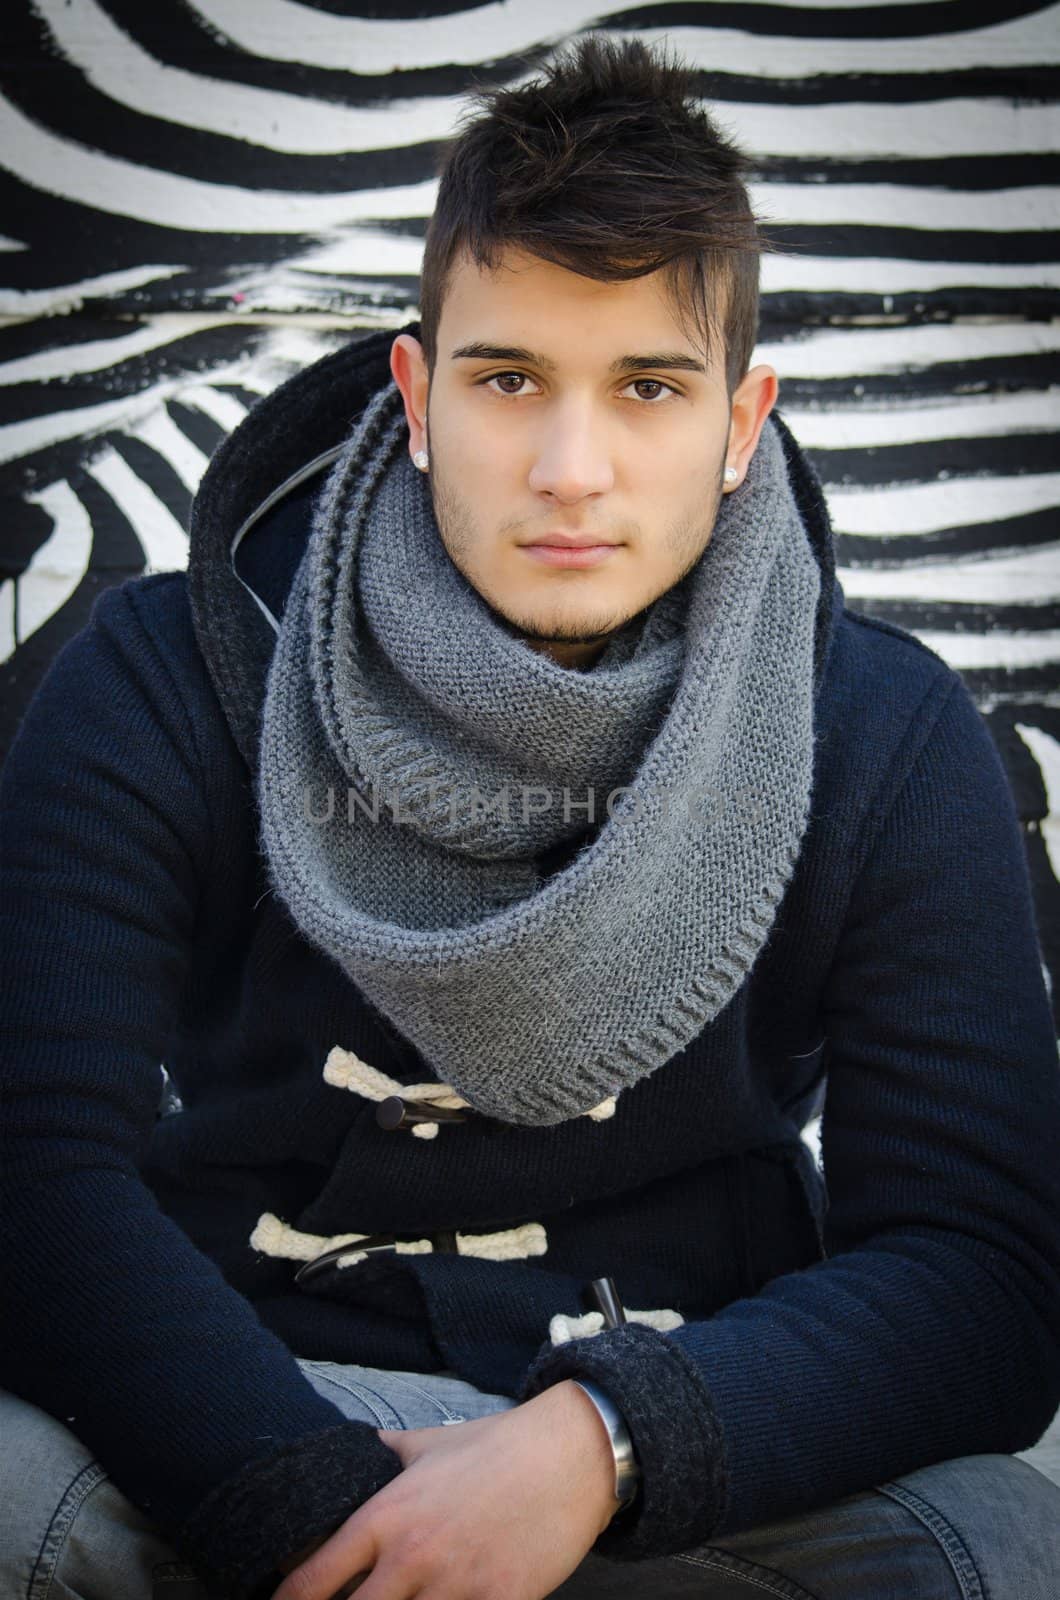 Handsome young man sitting against zebra striped design by artofphoto